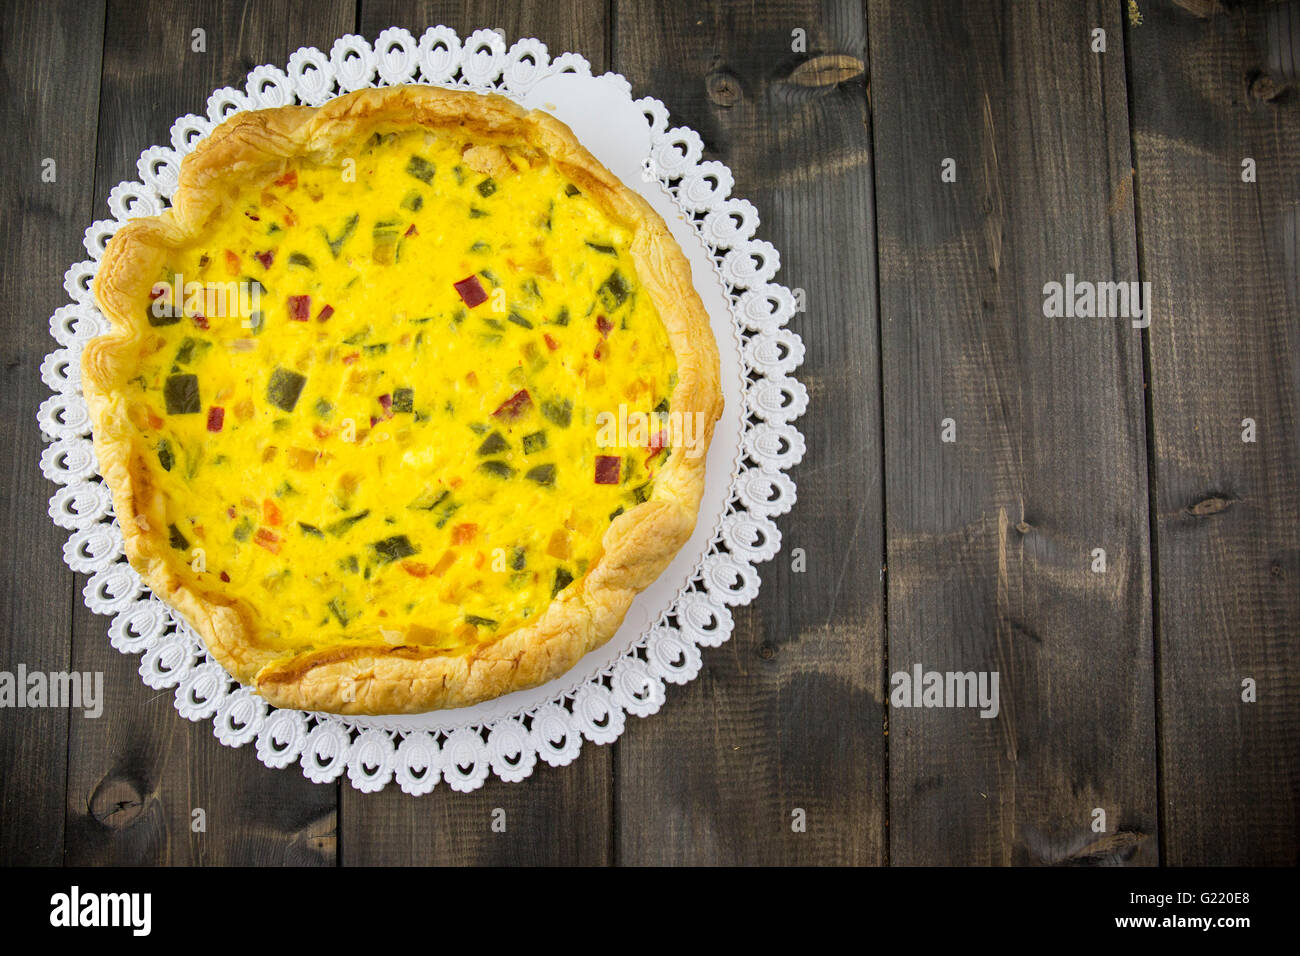 Savory pie with peppers, onion, carrots and zucchini. Stock Photo